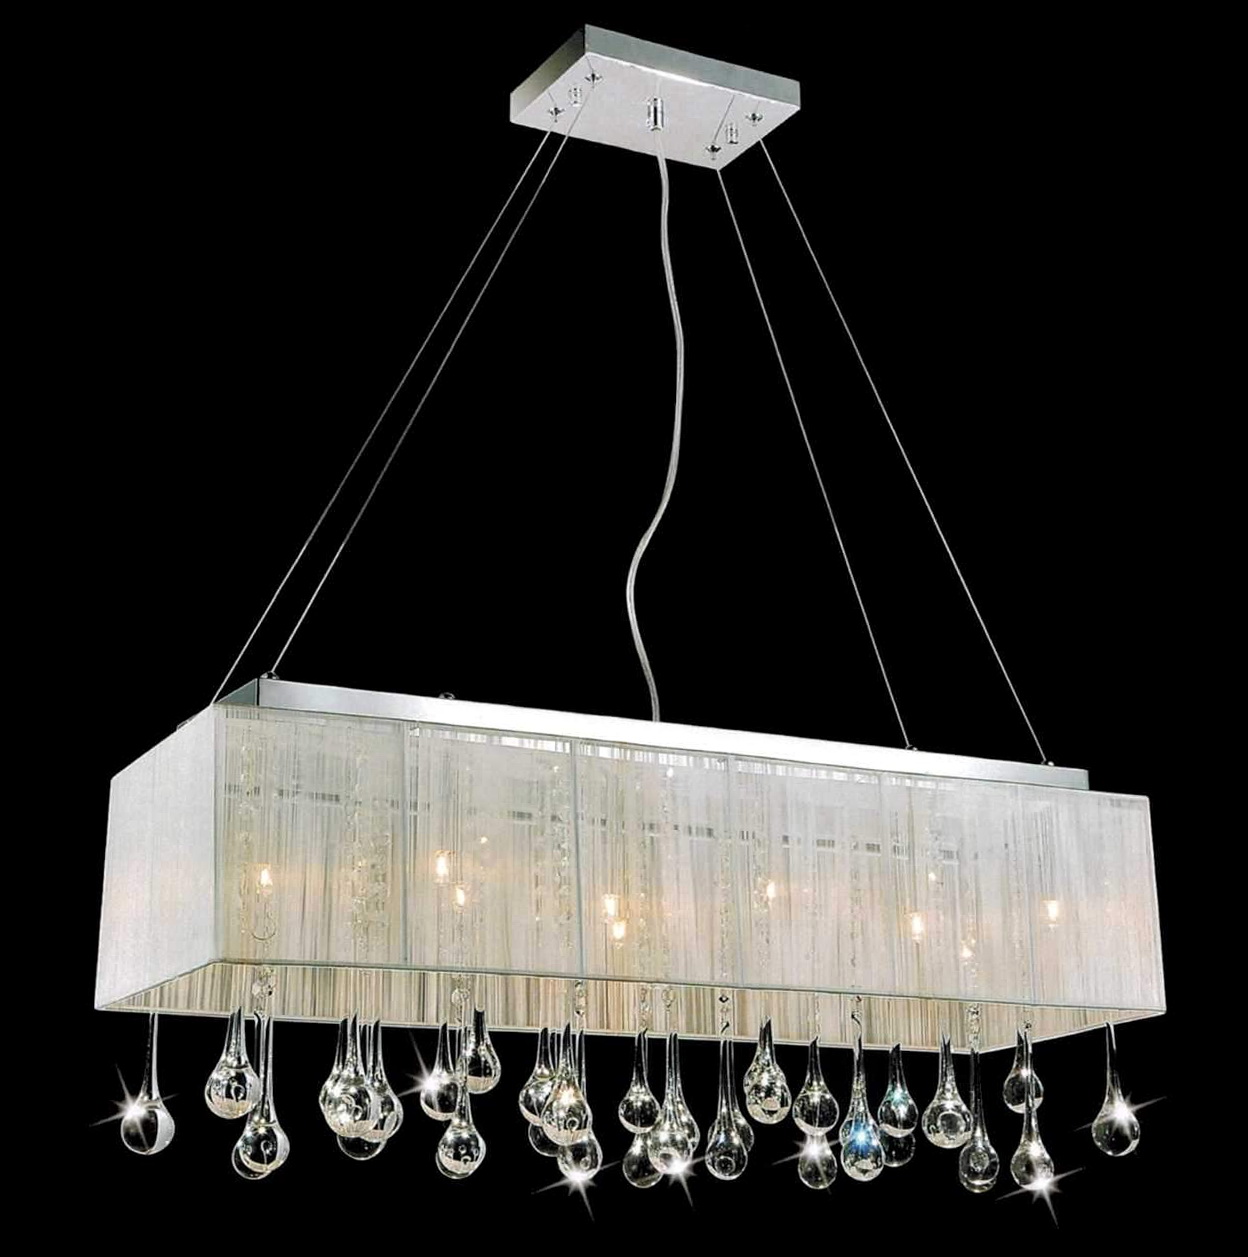 Embrace Retro Glam with a Stunning Crystal Rectangular Chandelier